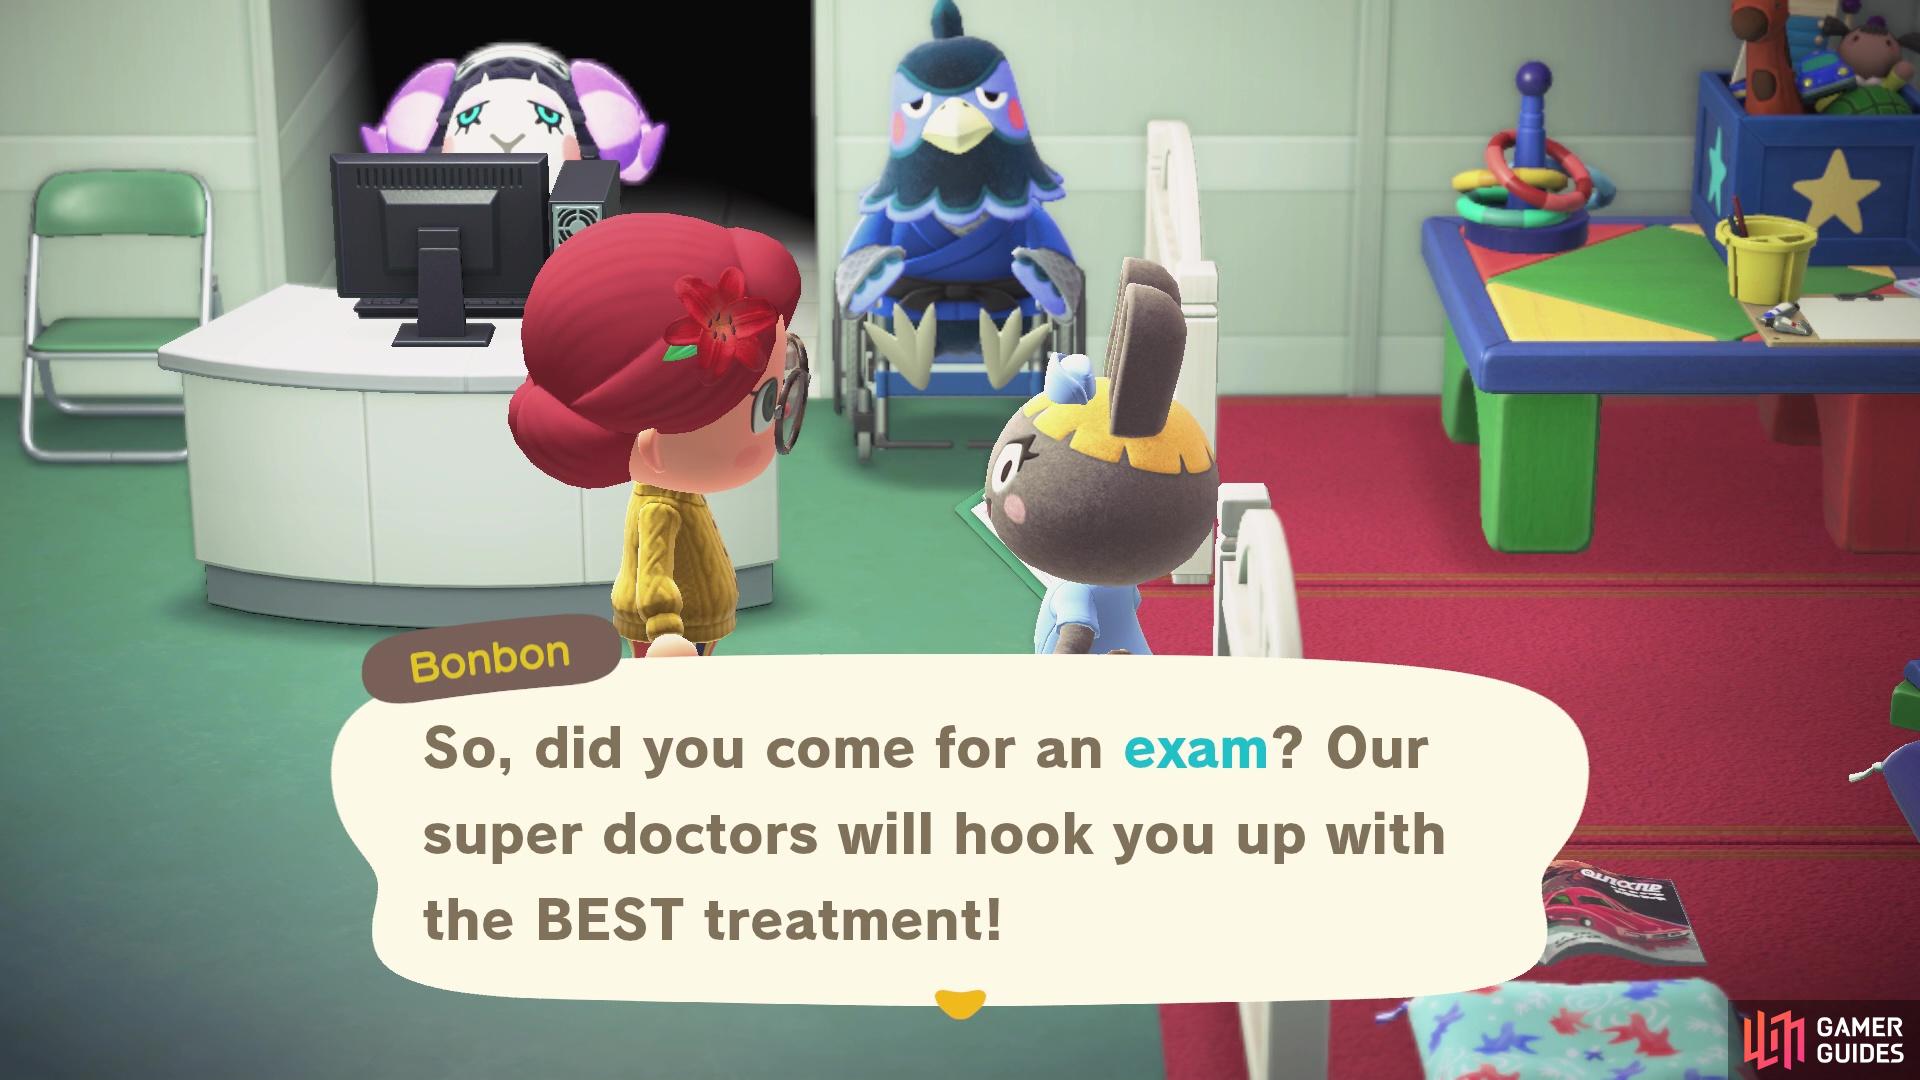 You can go to the hospital yourself to ask for treatment